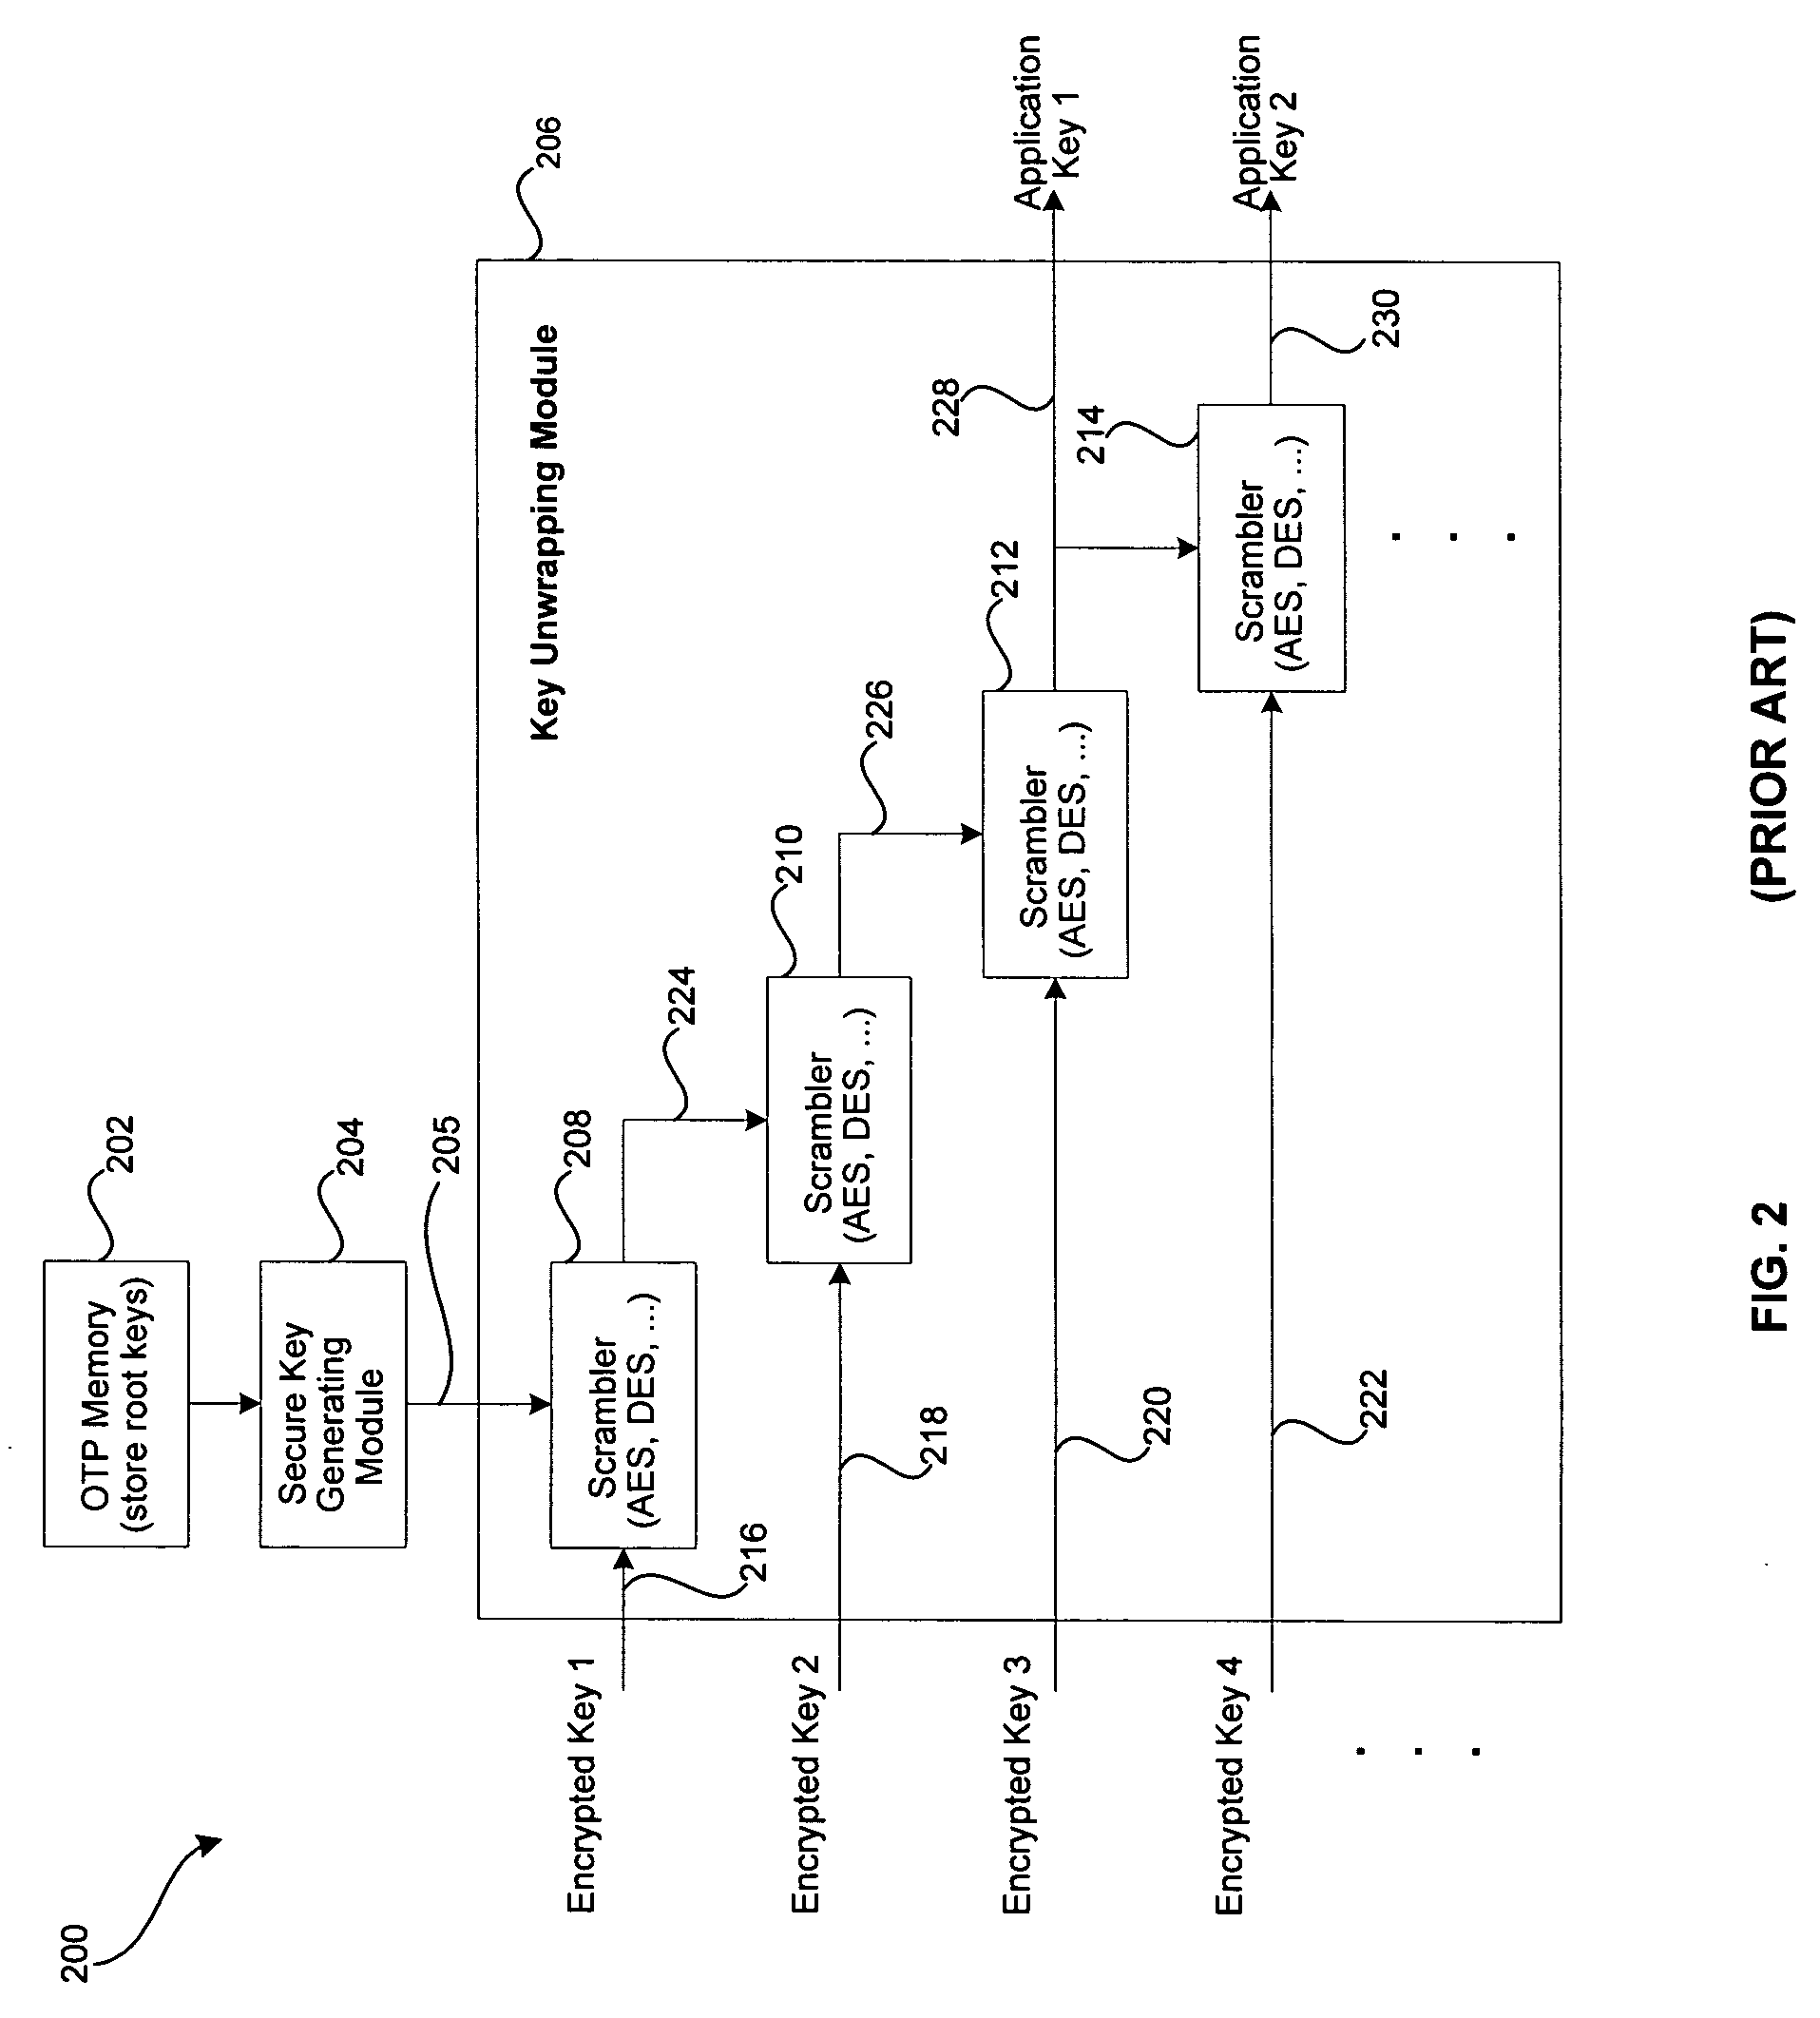 System and method for security key transmission with strong pairing to destination client